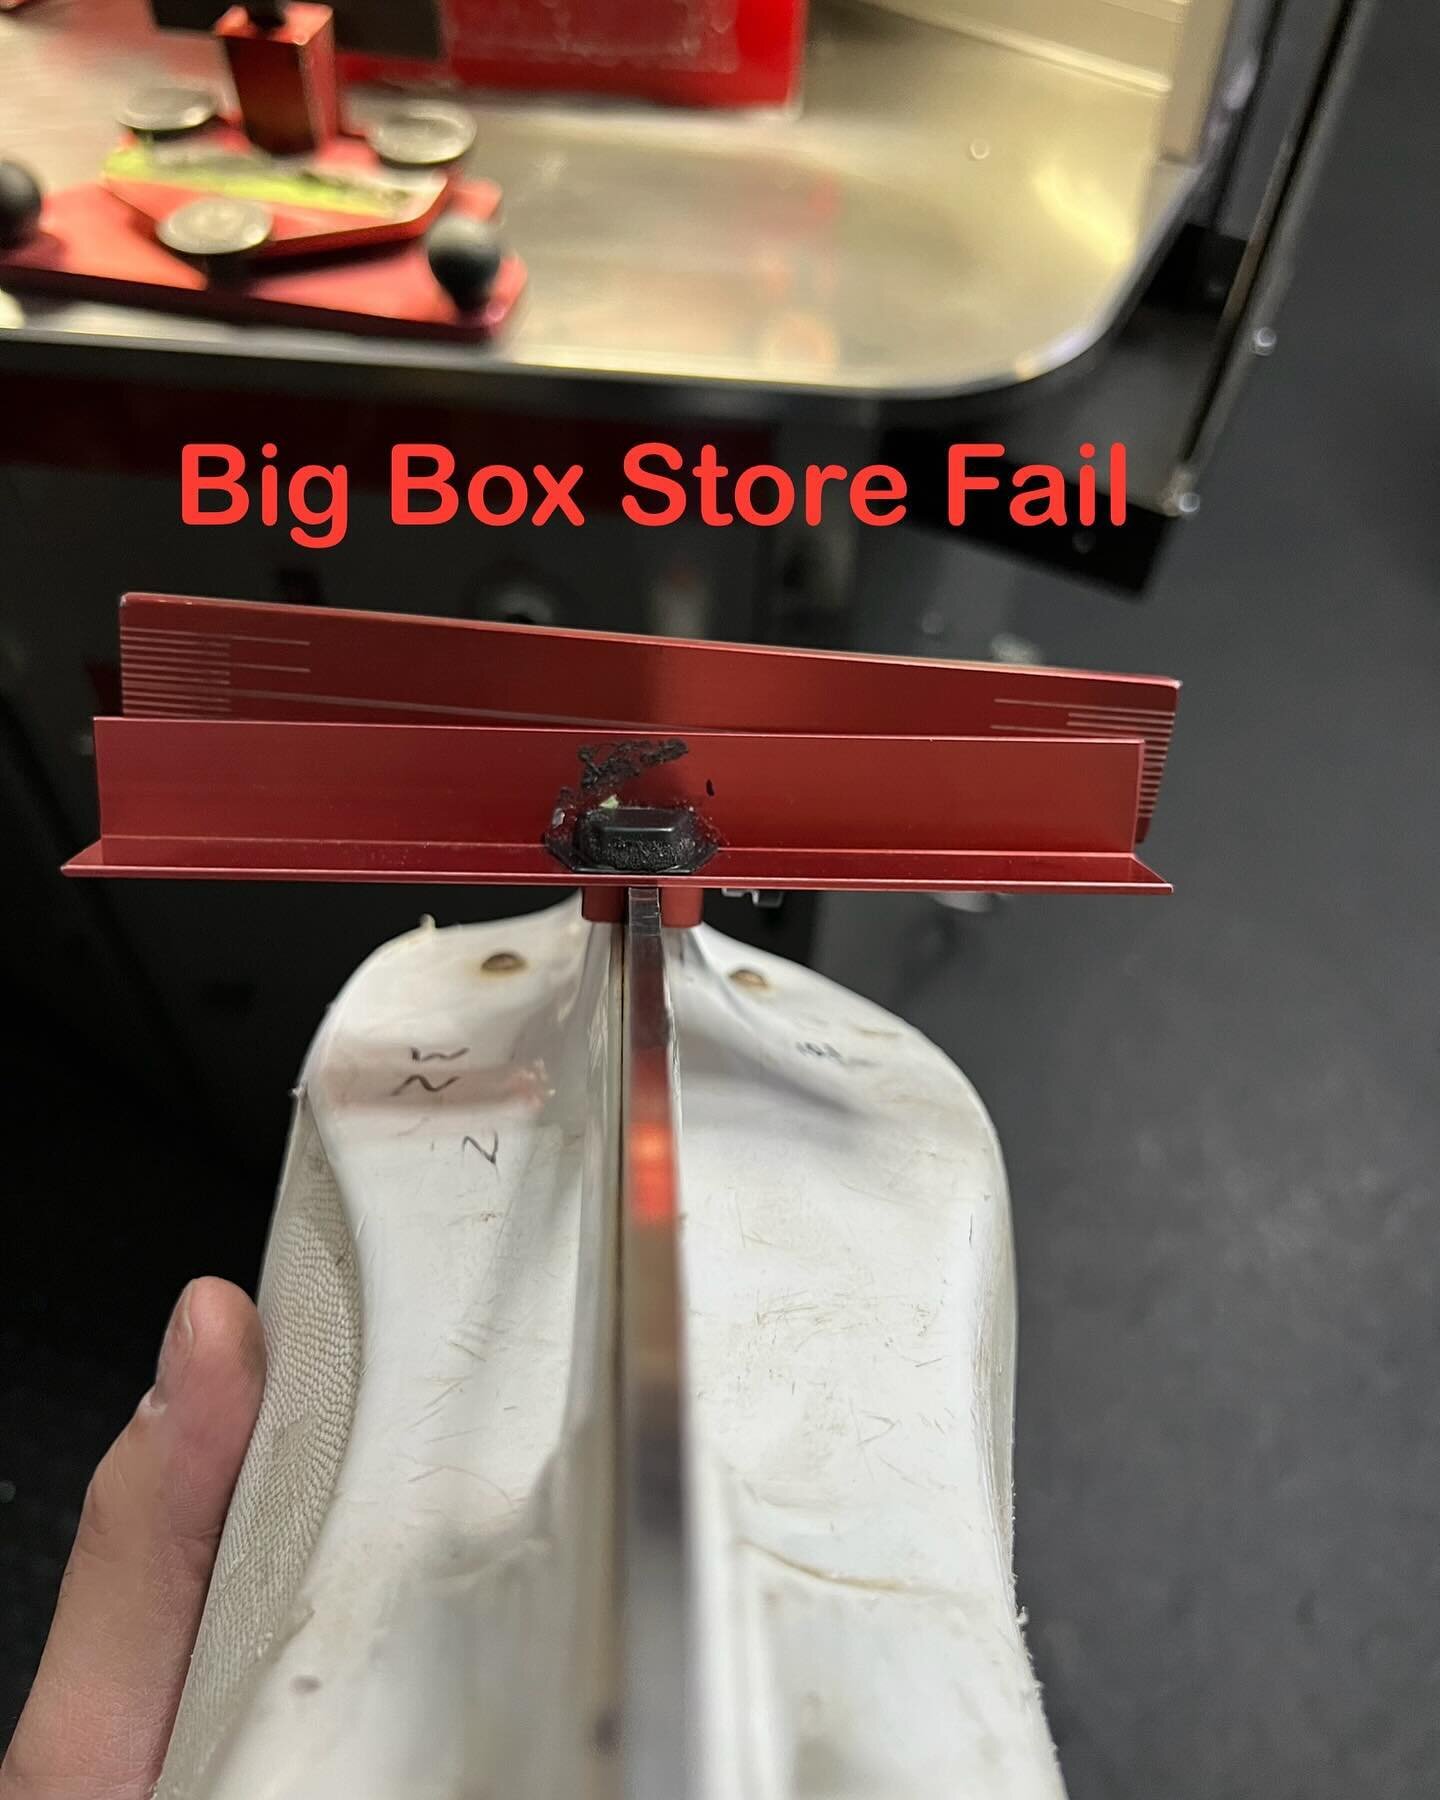 !!These came into the shop this way!! 

This is the second pair of goalie skates this week that have been totally messed up by a big box store. These would never leave our shop. This is why proper training is so important. #fails #trainyourteam #find